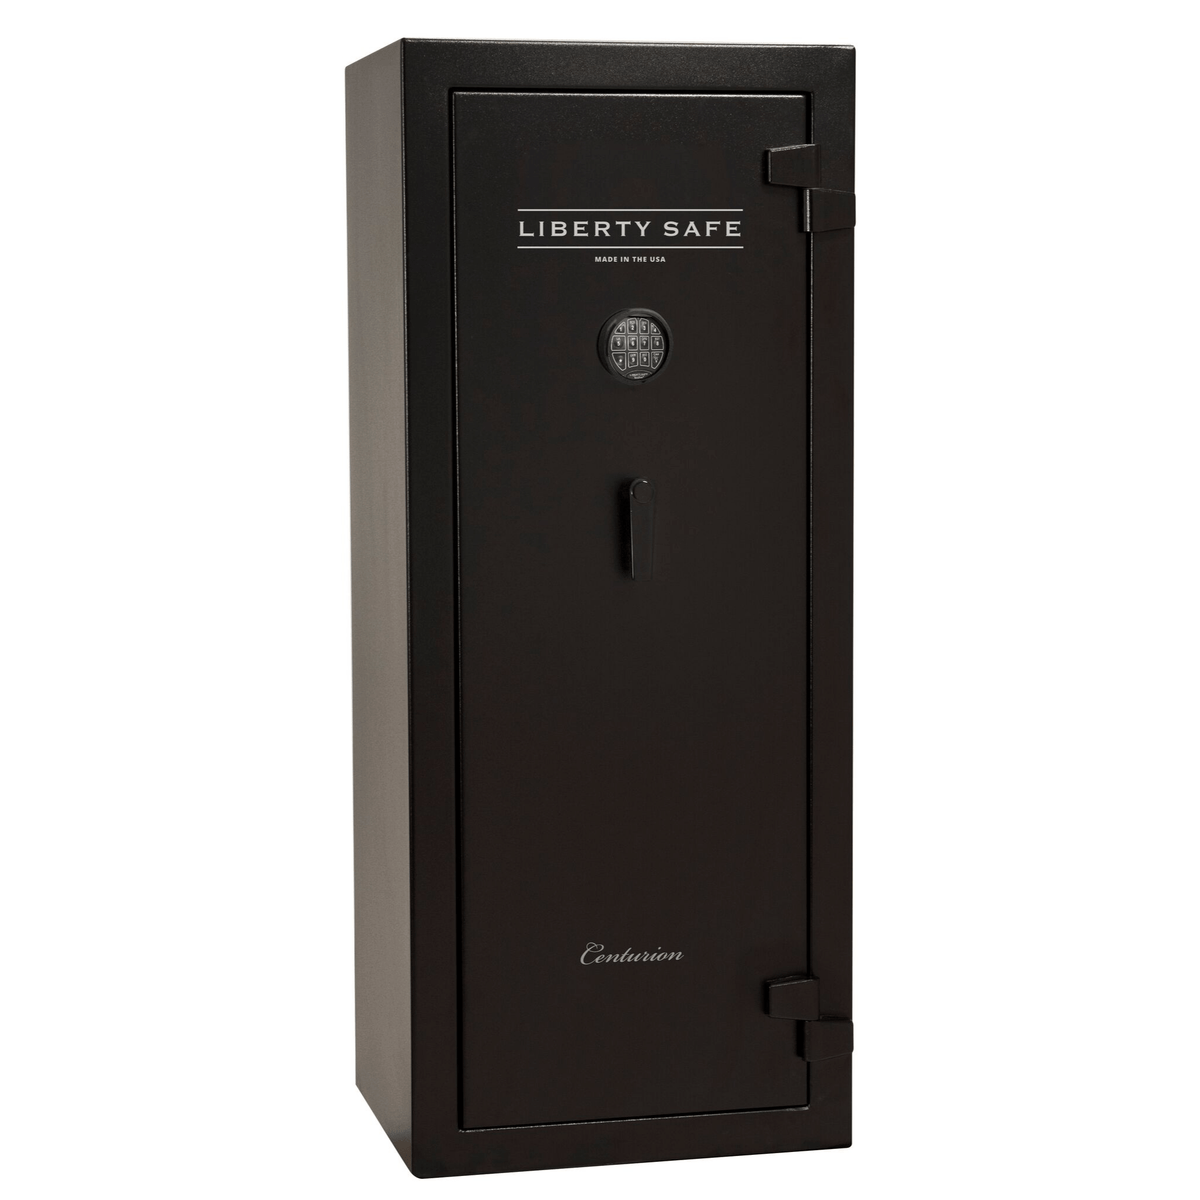 Centurion series | level 1 security | 30 minute fire protection - 18 dimensions  - open view - MODLOCK